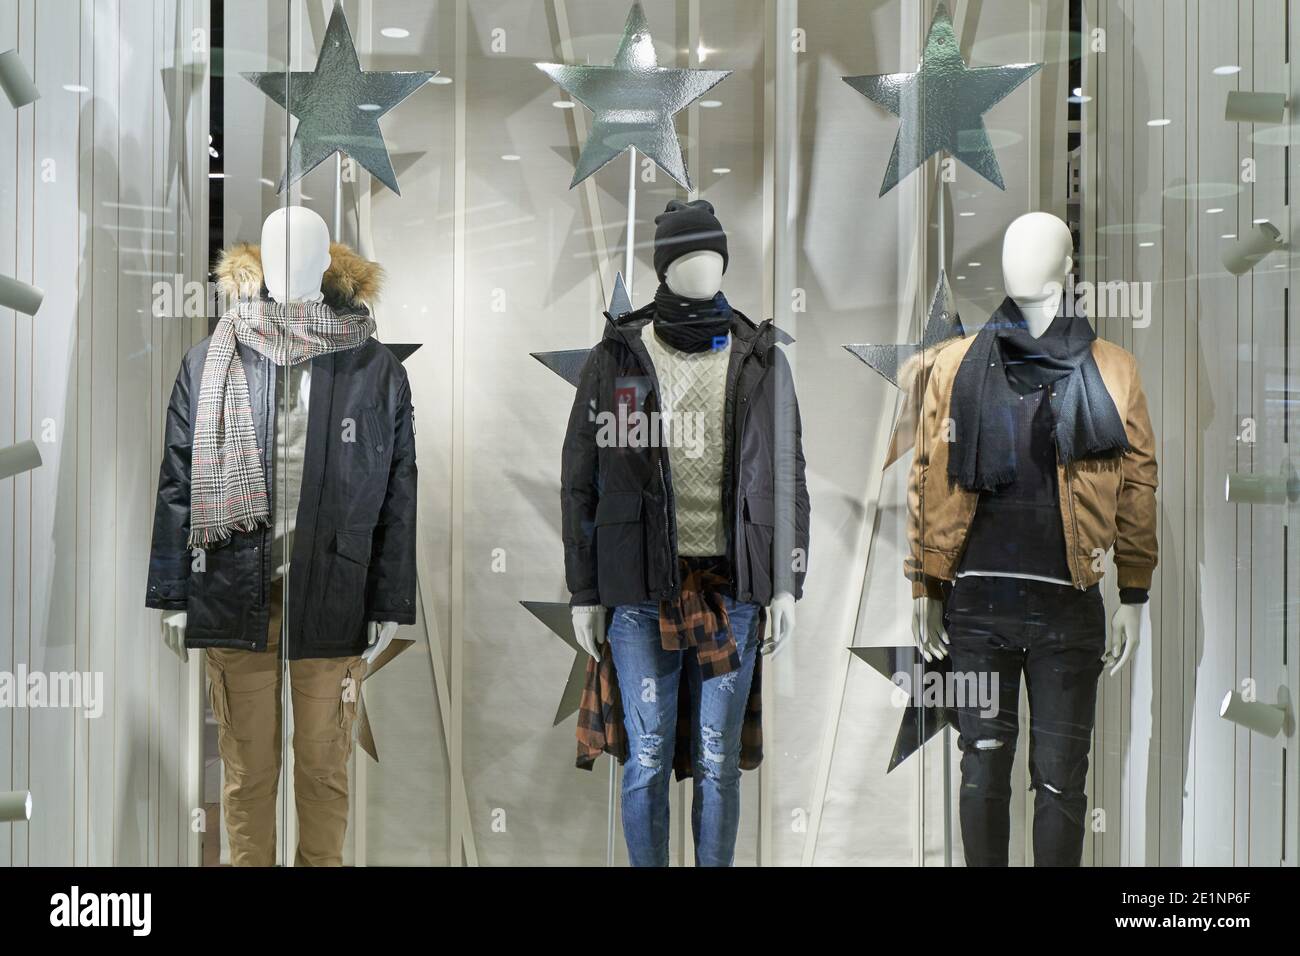 Mannequins in winter male outerwear in a shop window Stock Photo